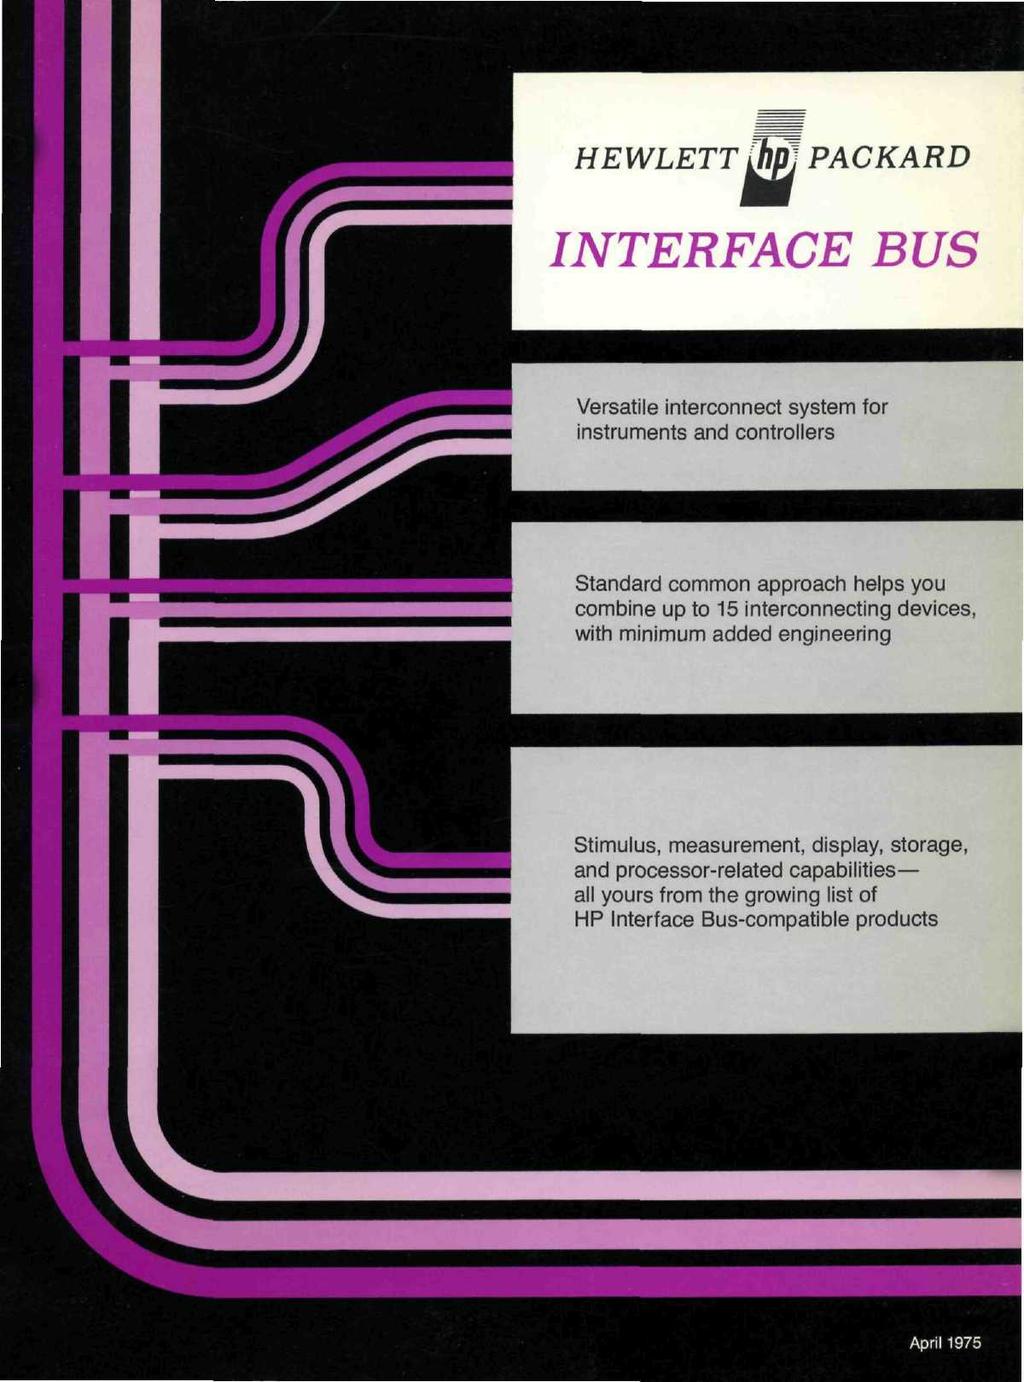 HEWLETT [hpl PACKARD INTERFACE BUS Versatile interconnect system for instruments and controllers Standard common approach helps you combine up to 15 interconnecting devices, with